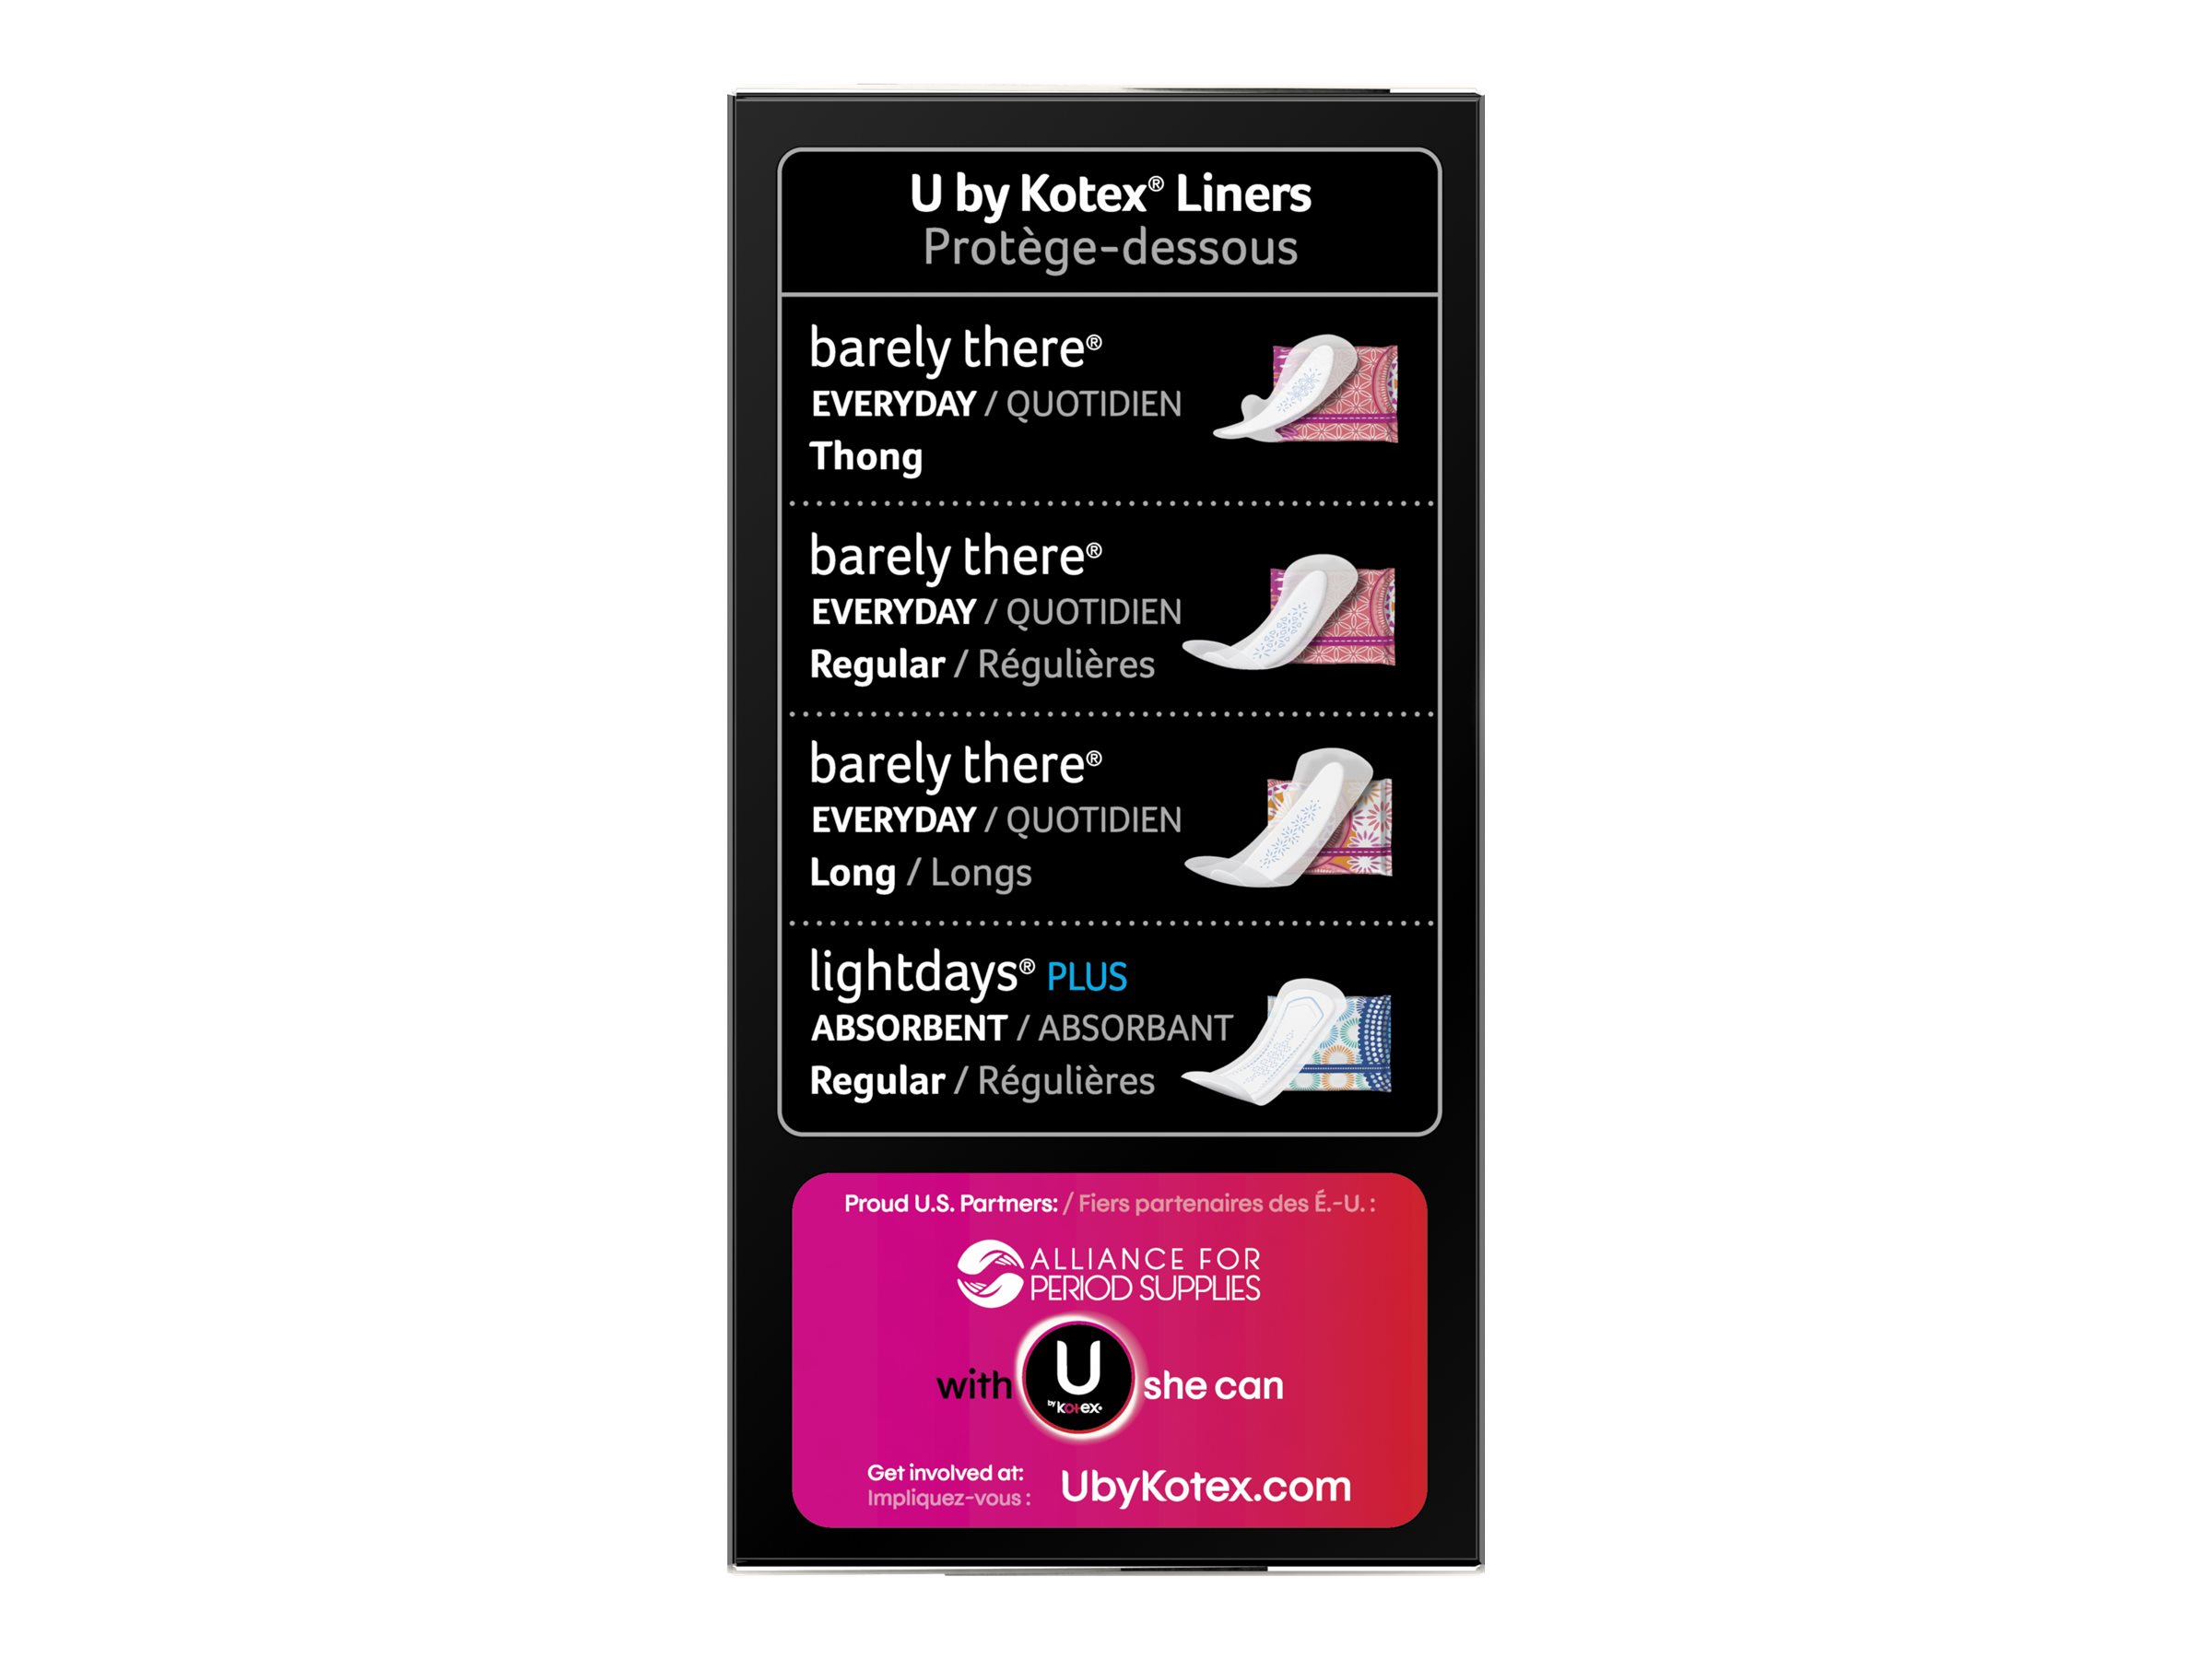 U by Kotex Balance Daily Wrapped Thong Panty Liners, Light Absorbency,  Regular Length, 50 Count 50 ct